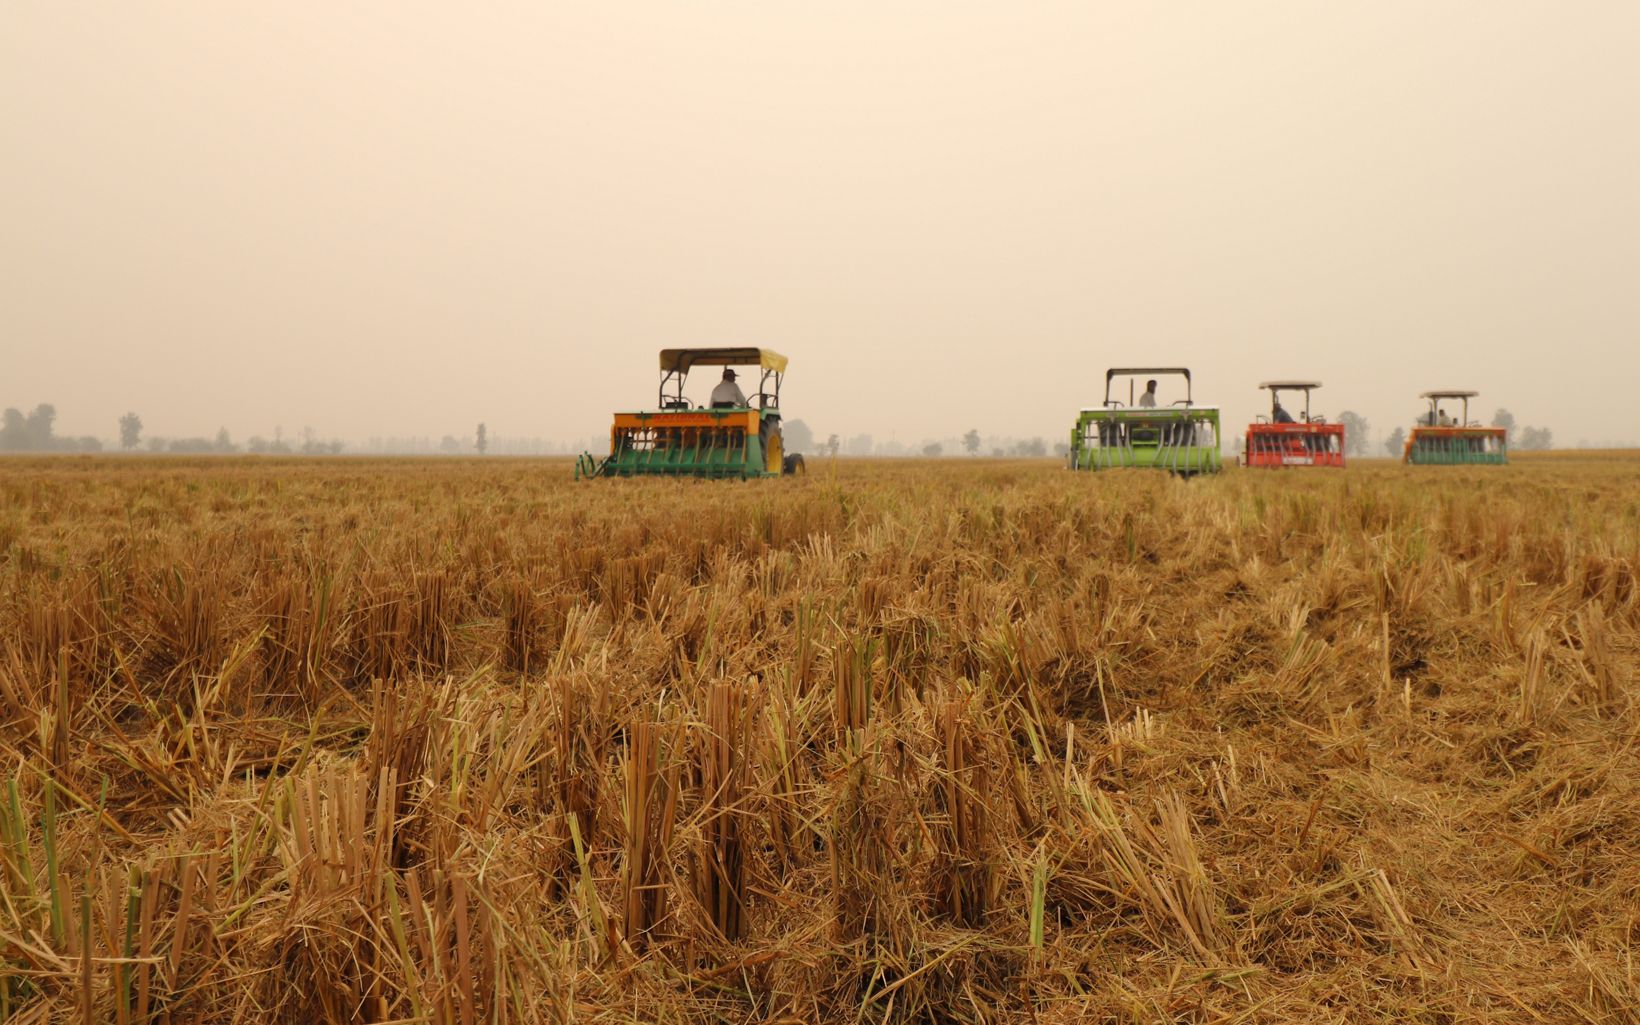 PUNJAB & HARYANA, INDIA The Happy Seeder, an innovative no-burn and no-till crop management solution, is promoted by research institutions and government for managing paddy residue.  © TNC India